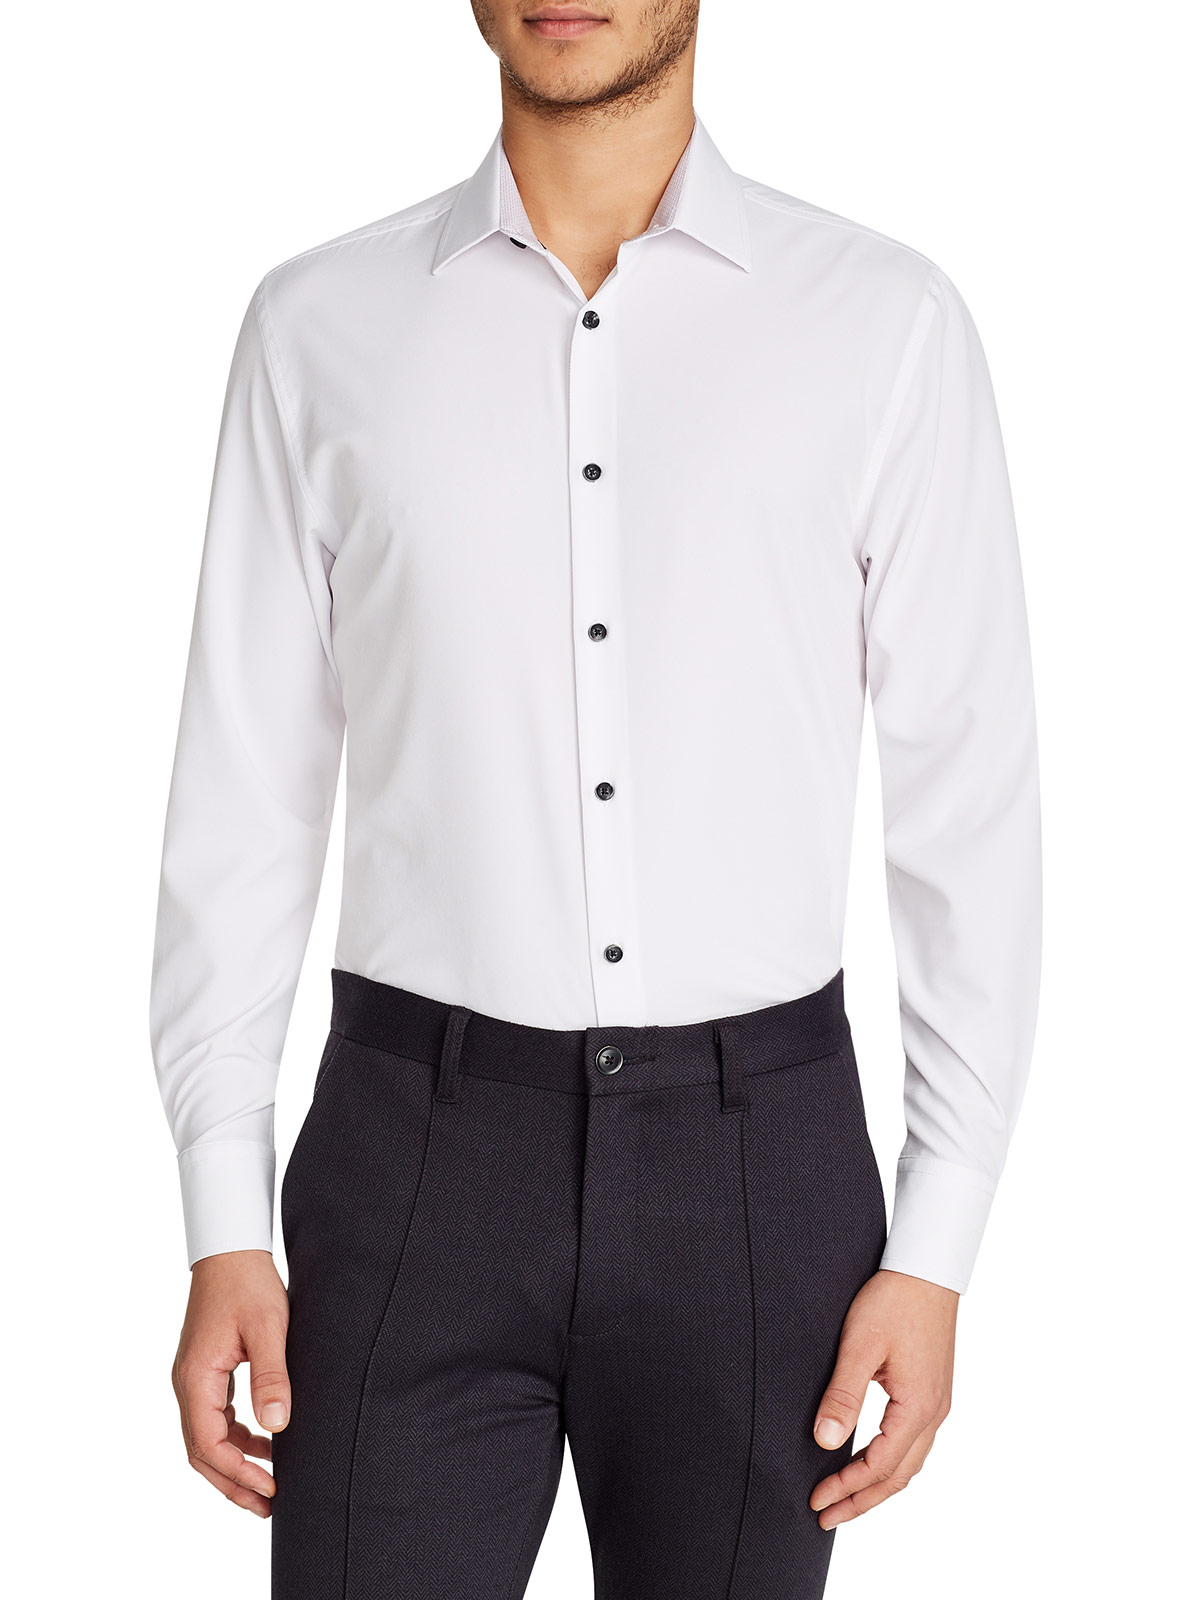 White Solid Cooling Performance Dress Shirt